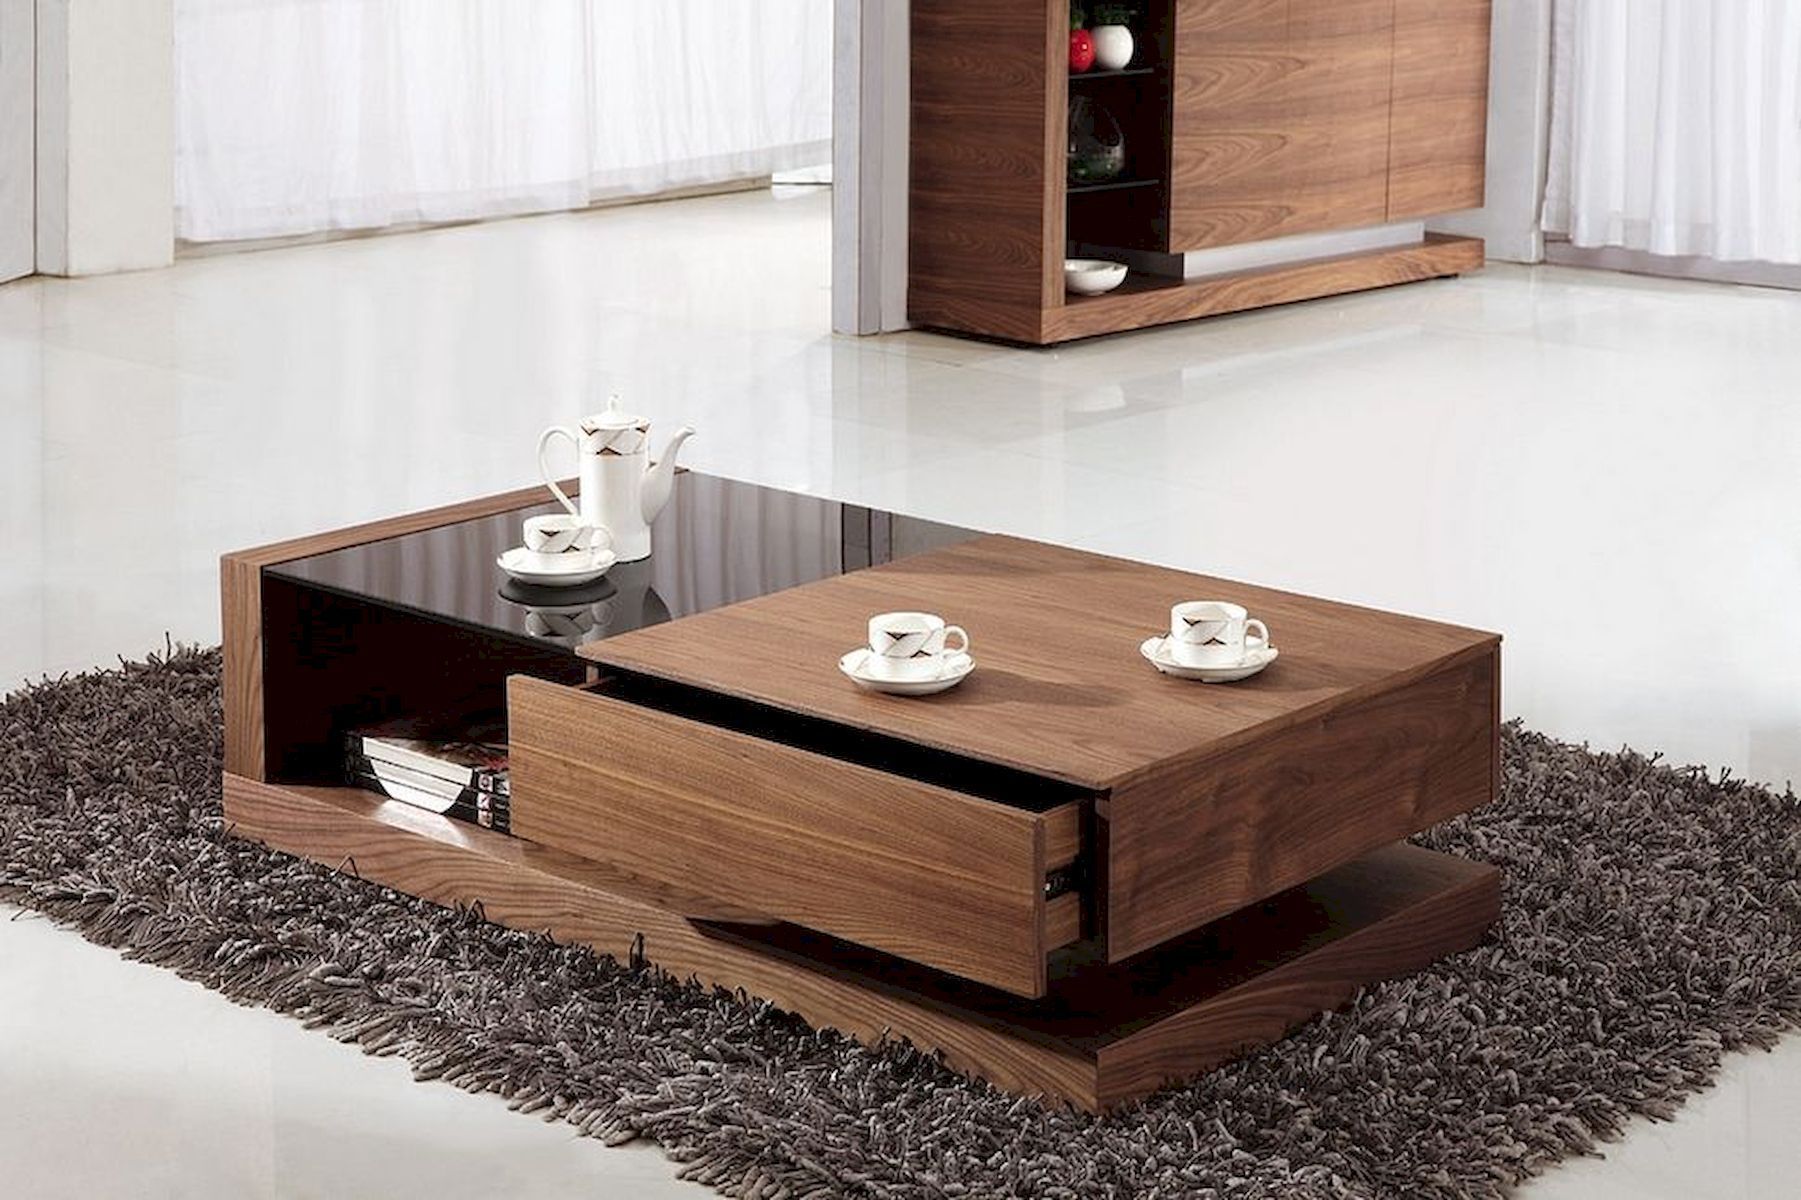 Wooden Coffee Table Designs: Ideas For Your Home – Coffee Table Decor In Modern Wooden X Design Coffee Tables (View 10 of 20)